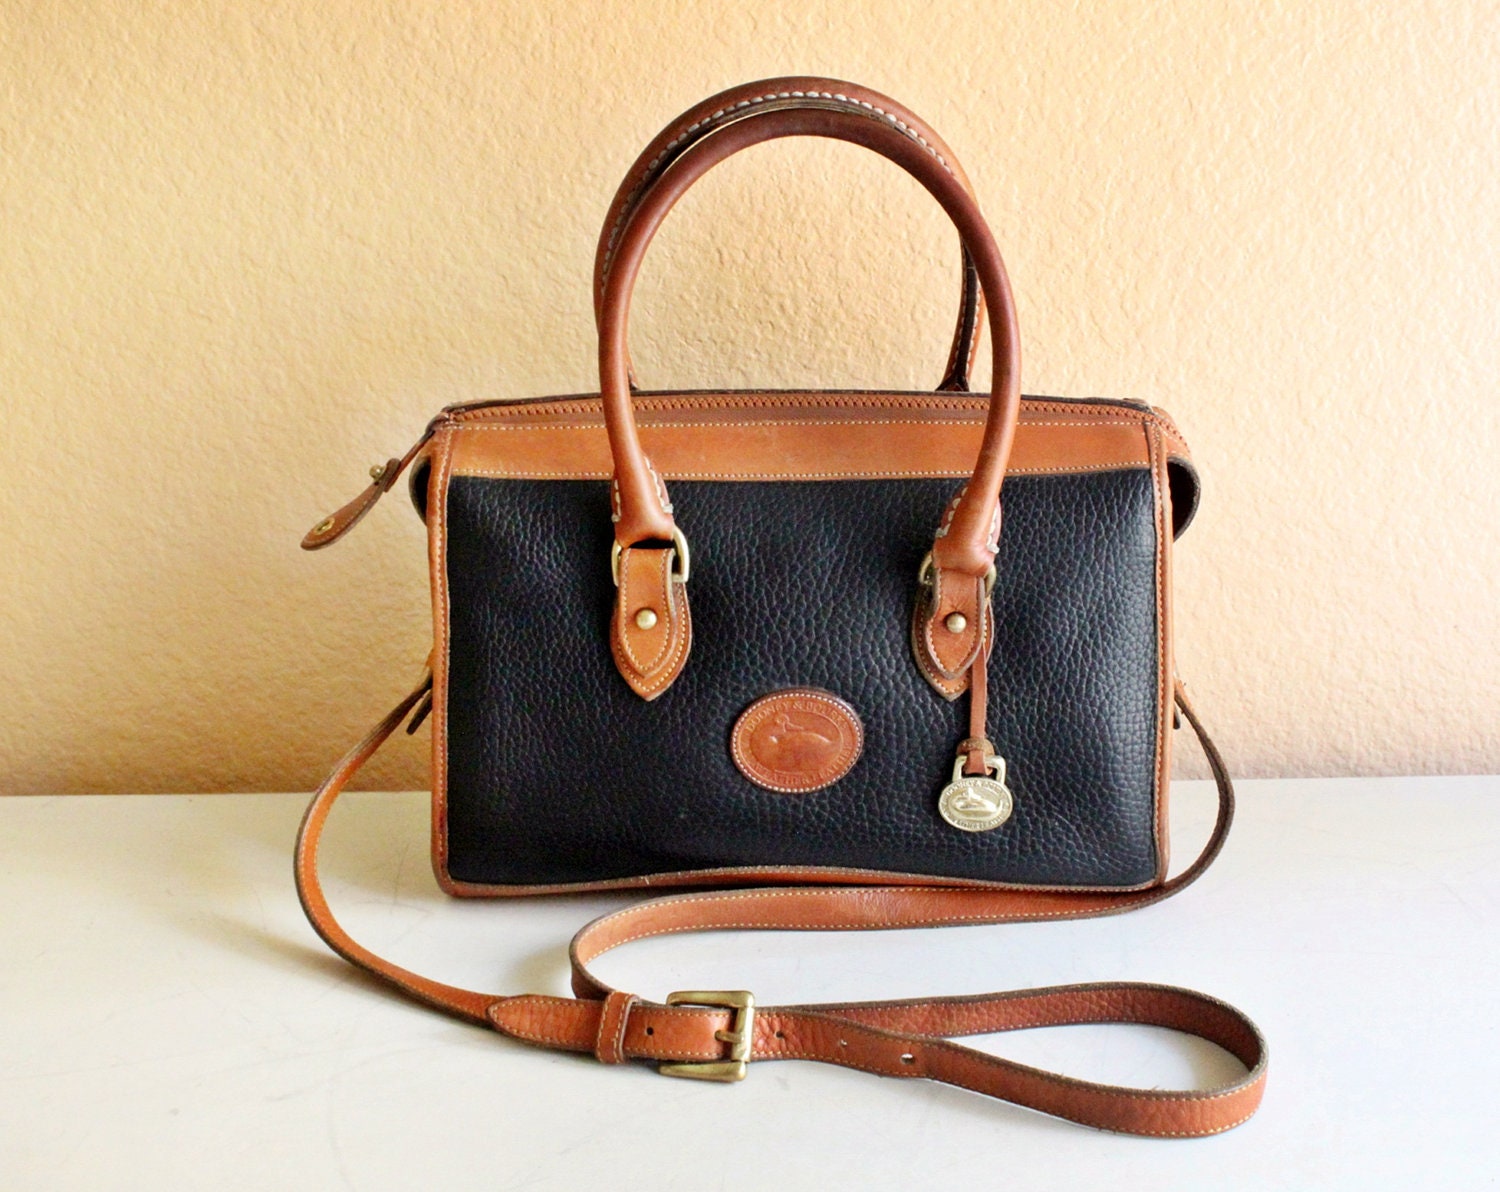 Dooney and Bourke Black Pebble Leather With Tan Leather Trim